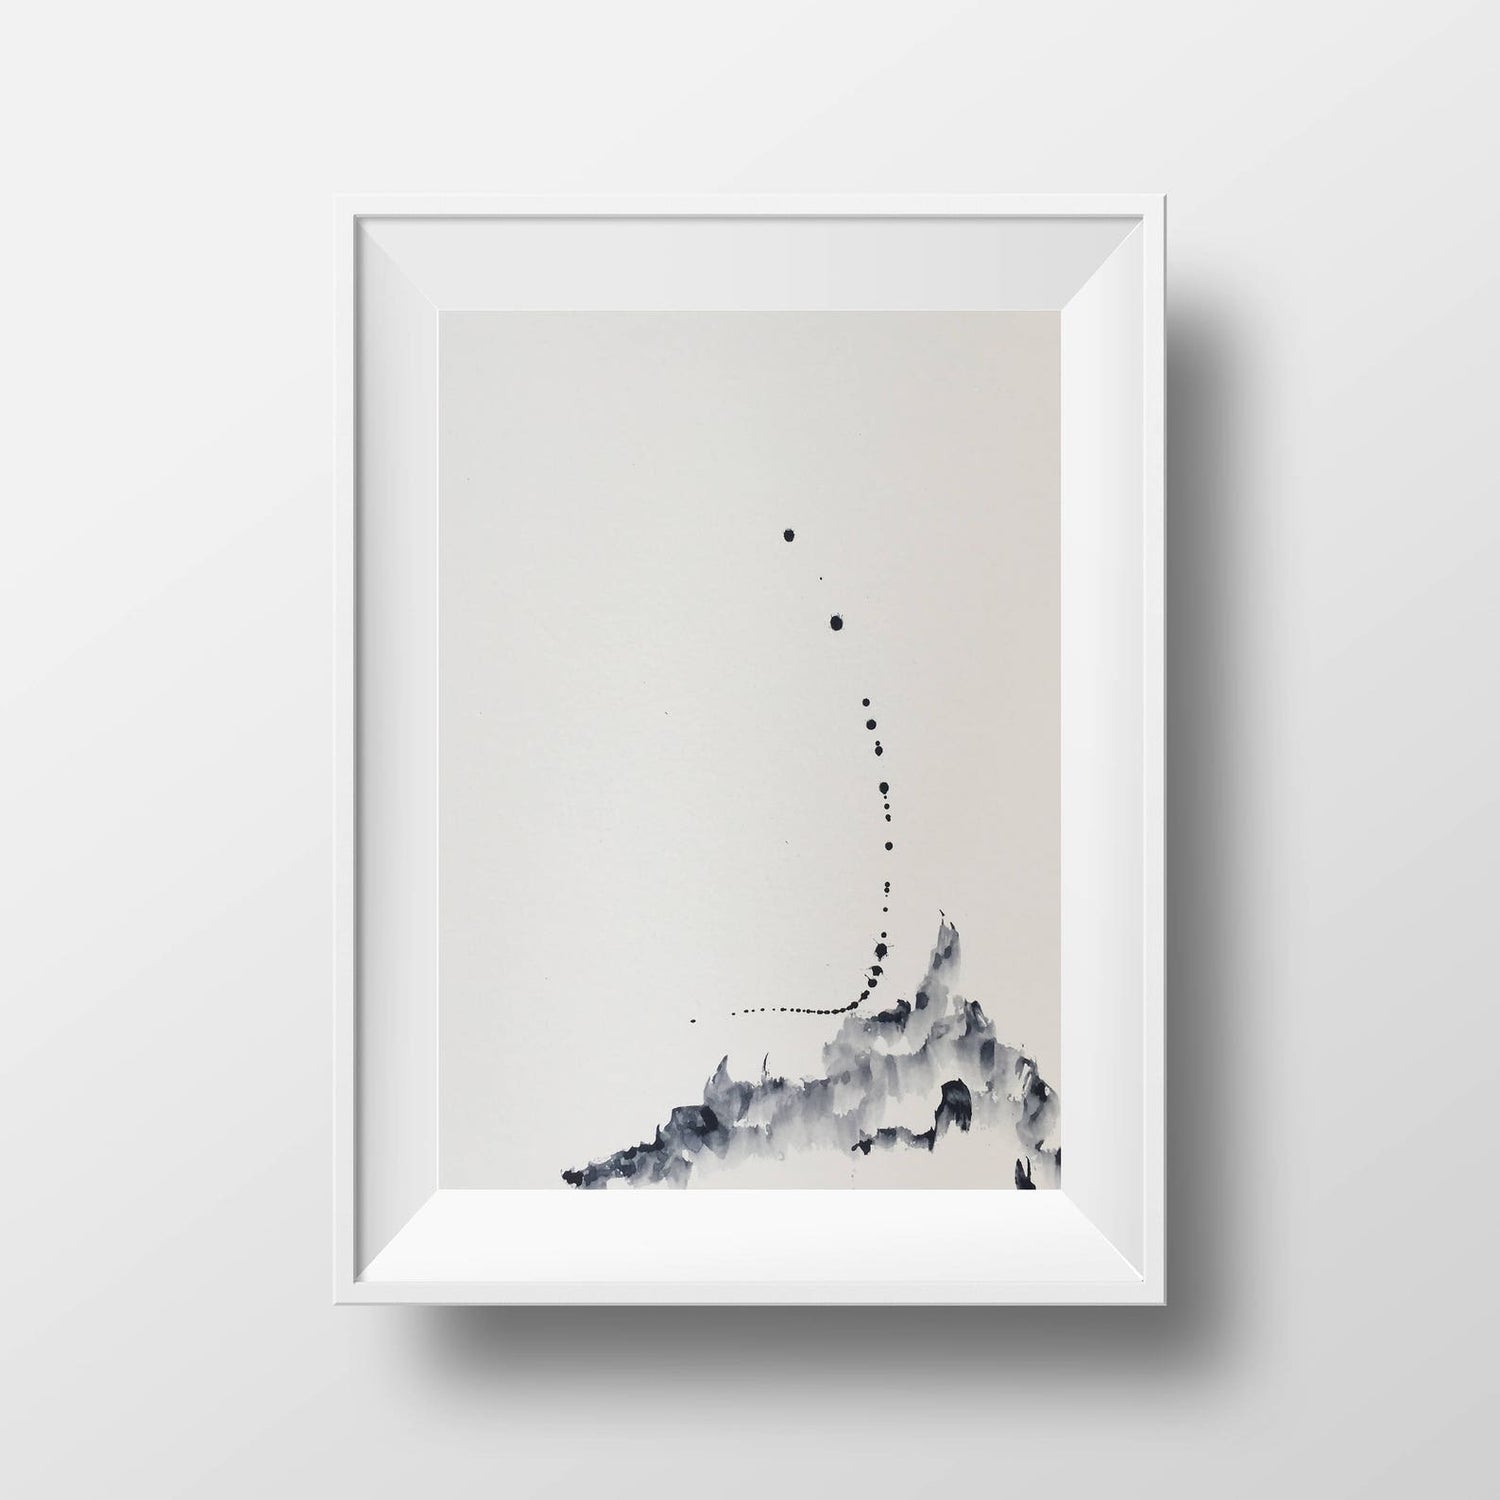 Iya Gallery best selling watercolour print inspired by characteristics of the wabi-sabi aesthetic: simplicity & tranquility hoping to bring serenity & calmness into people's lives & homes